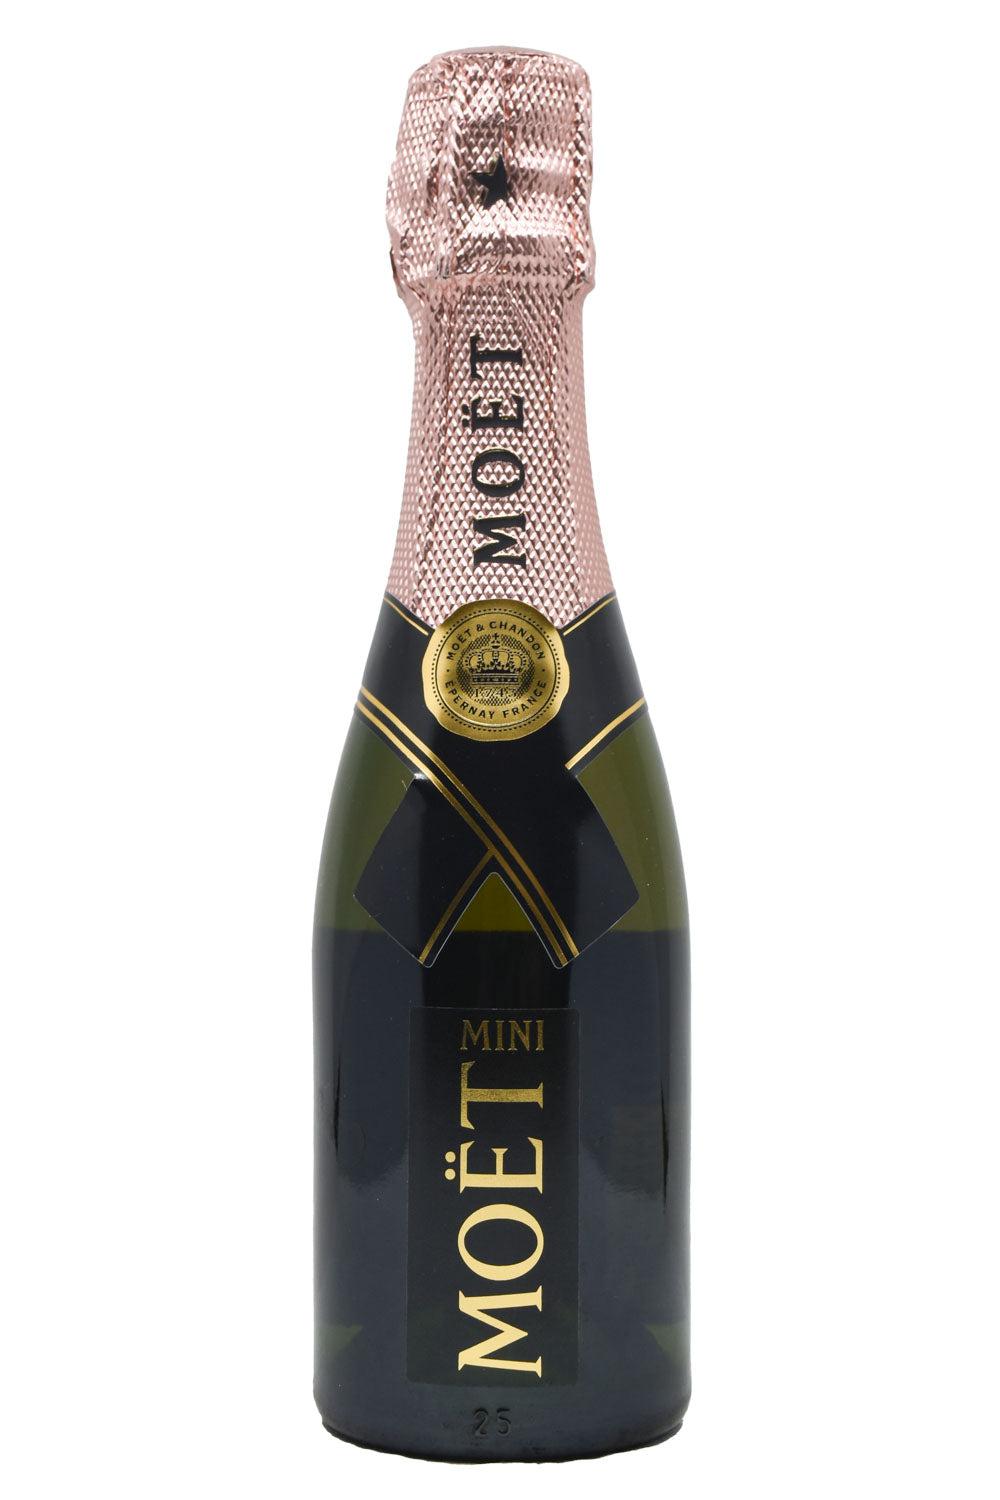 Moet & Chandon Brut Rose Champagne Imperial - The Jug Store